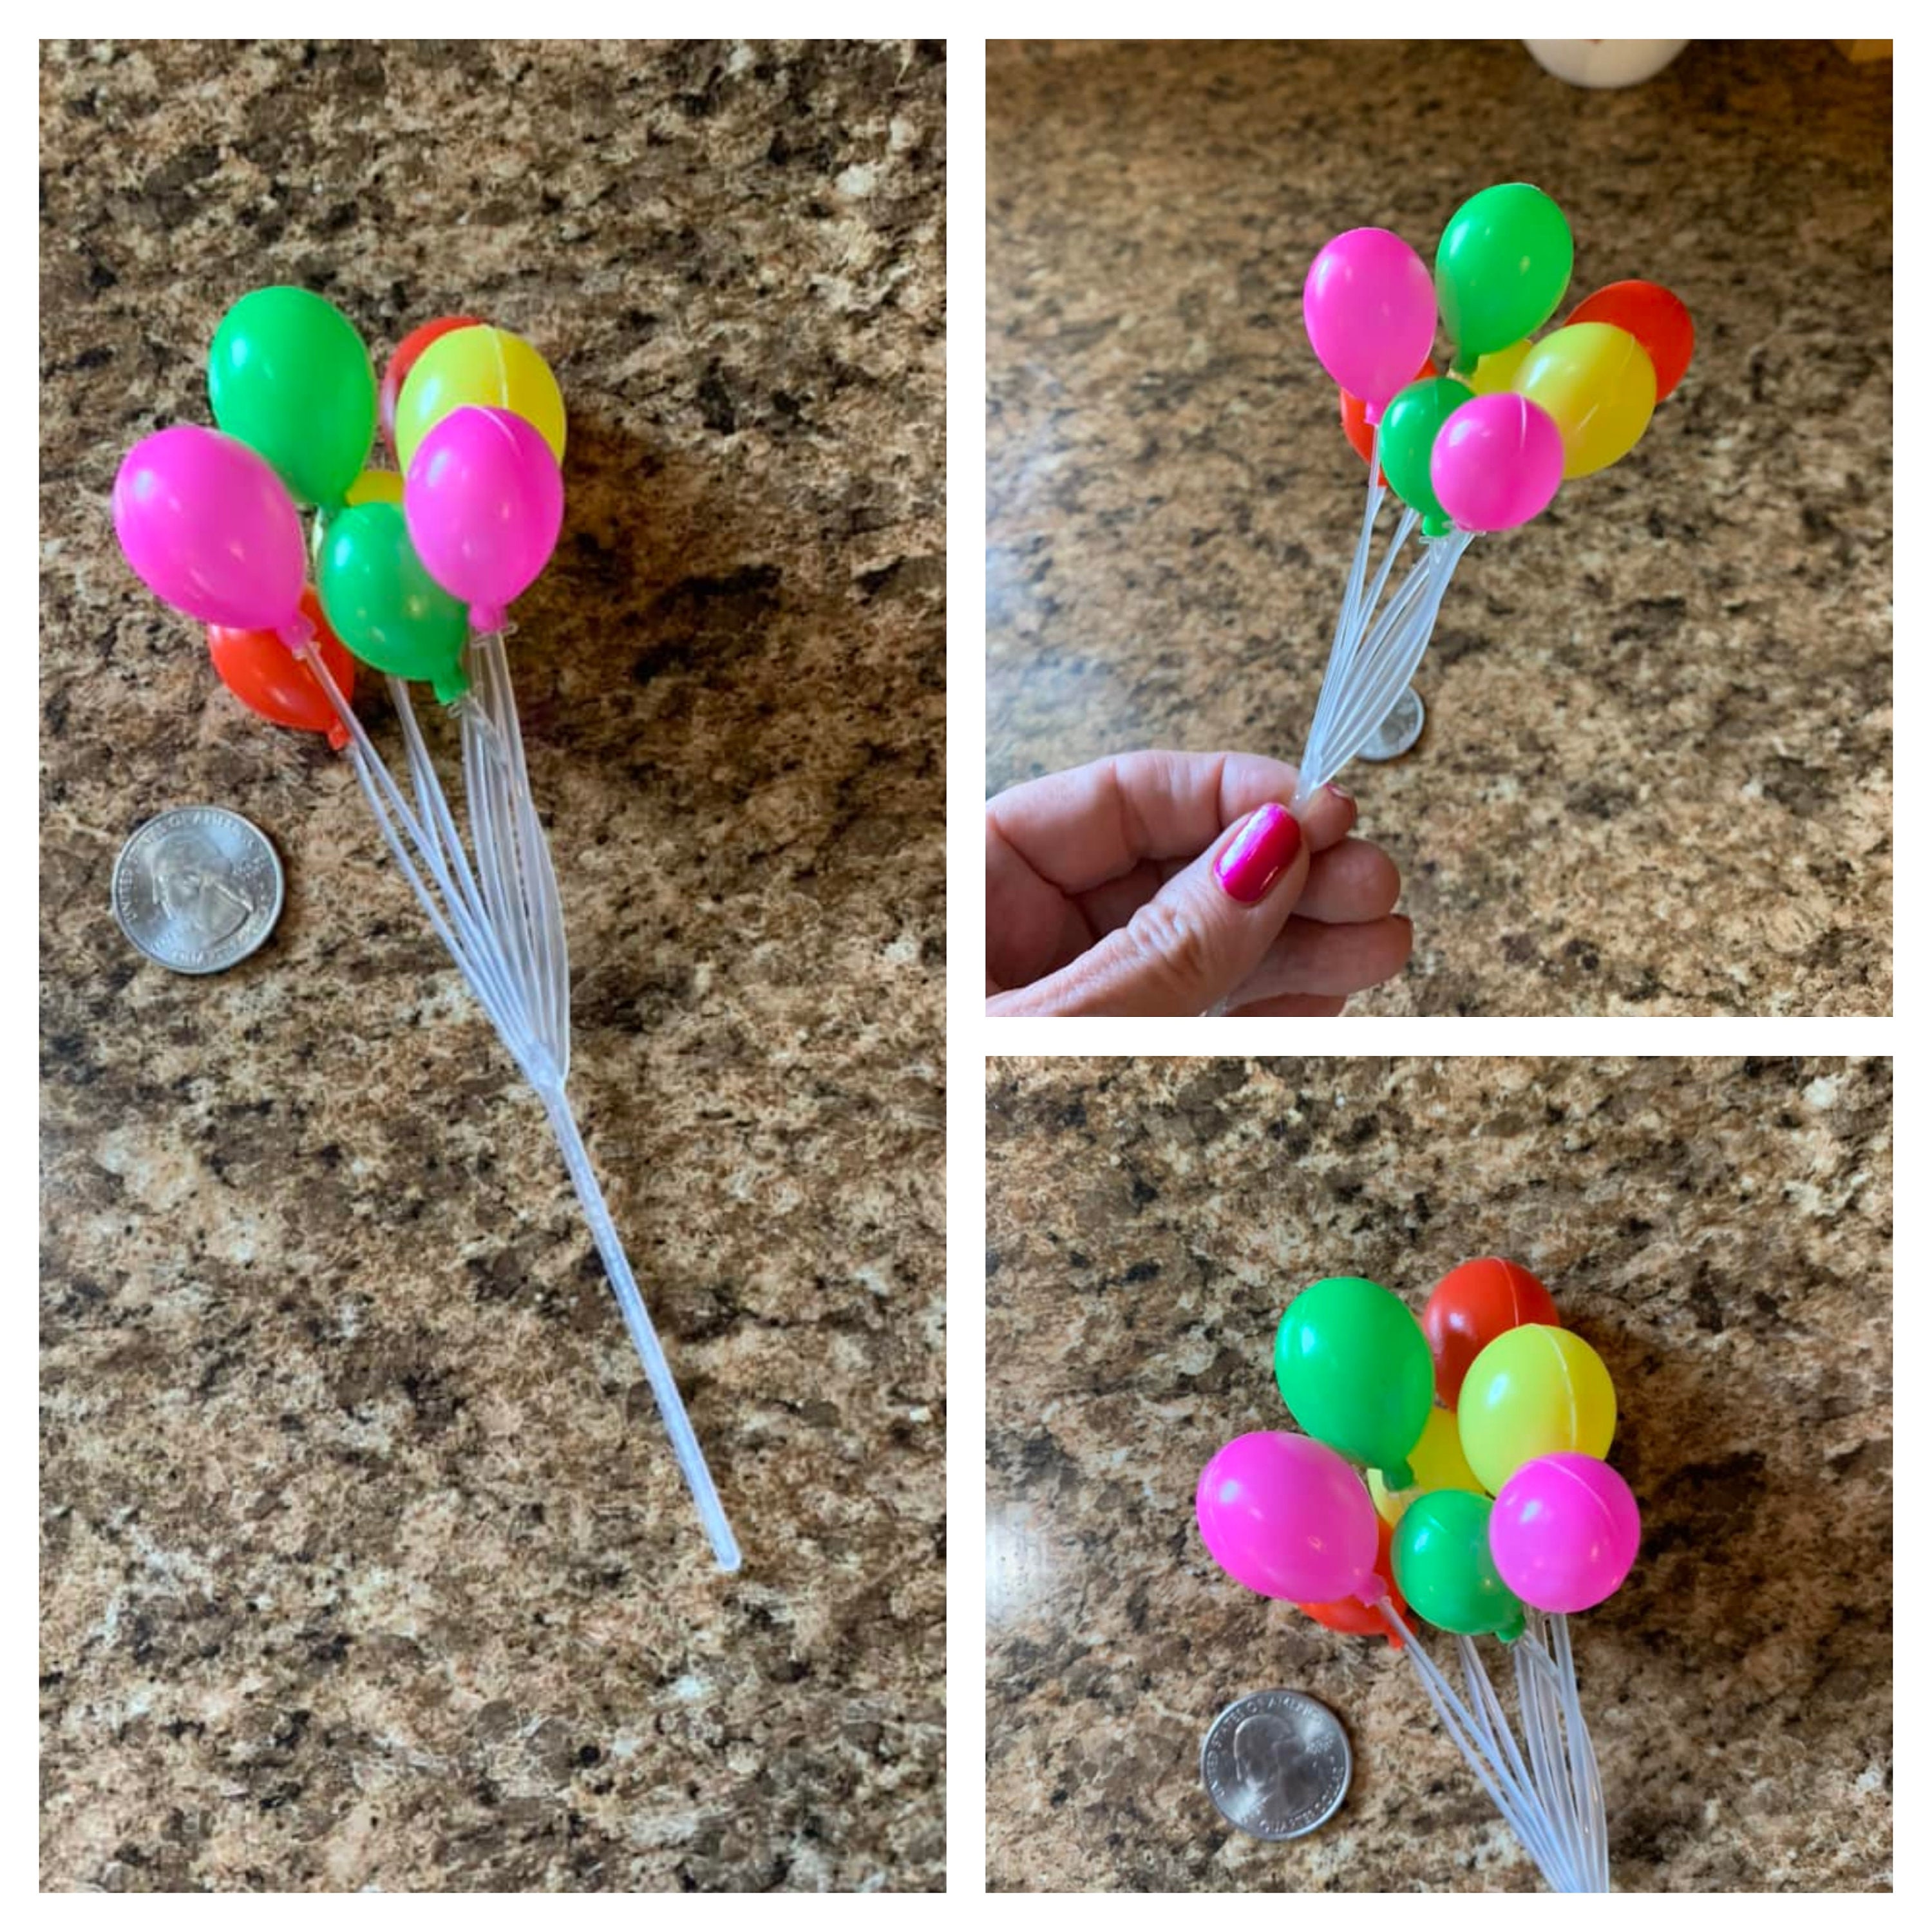 Balloon Glue Dots – Elves of the Party